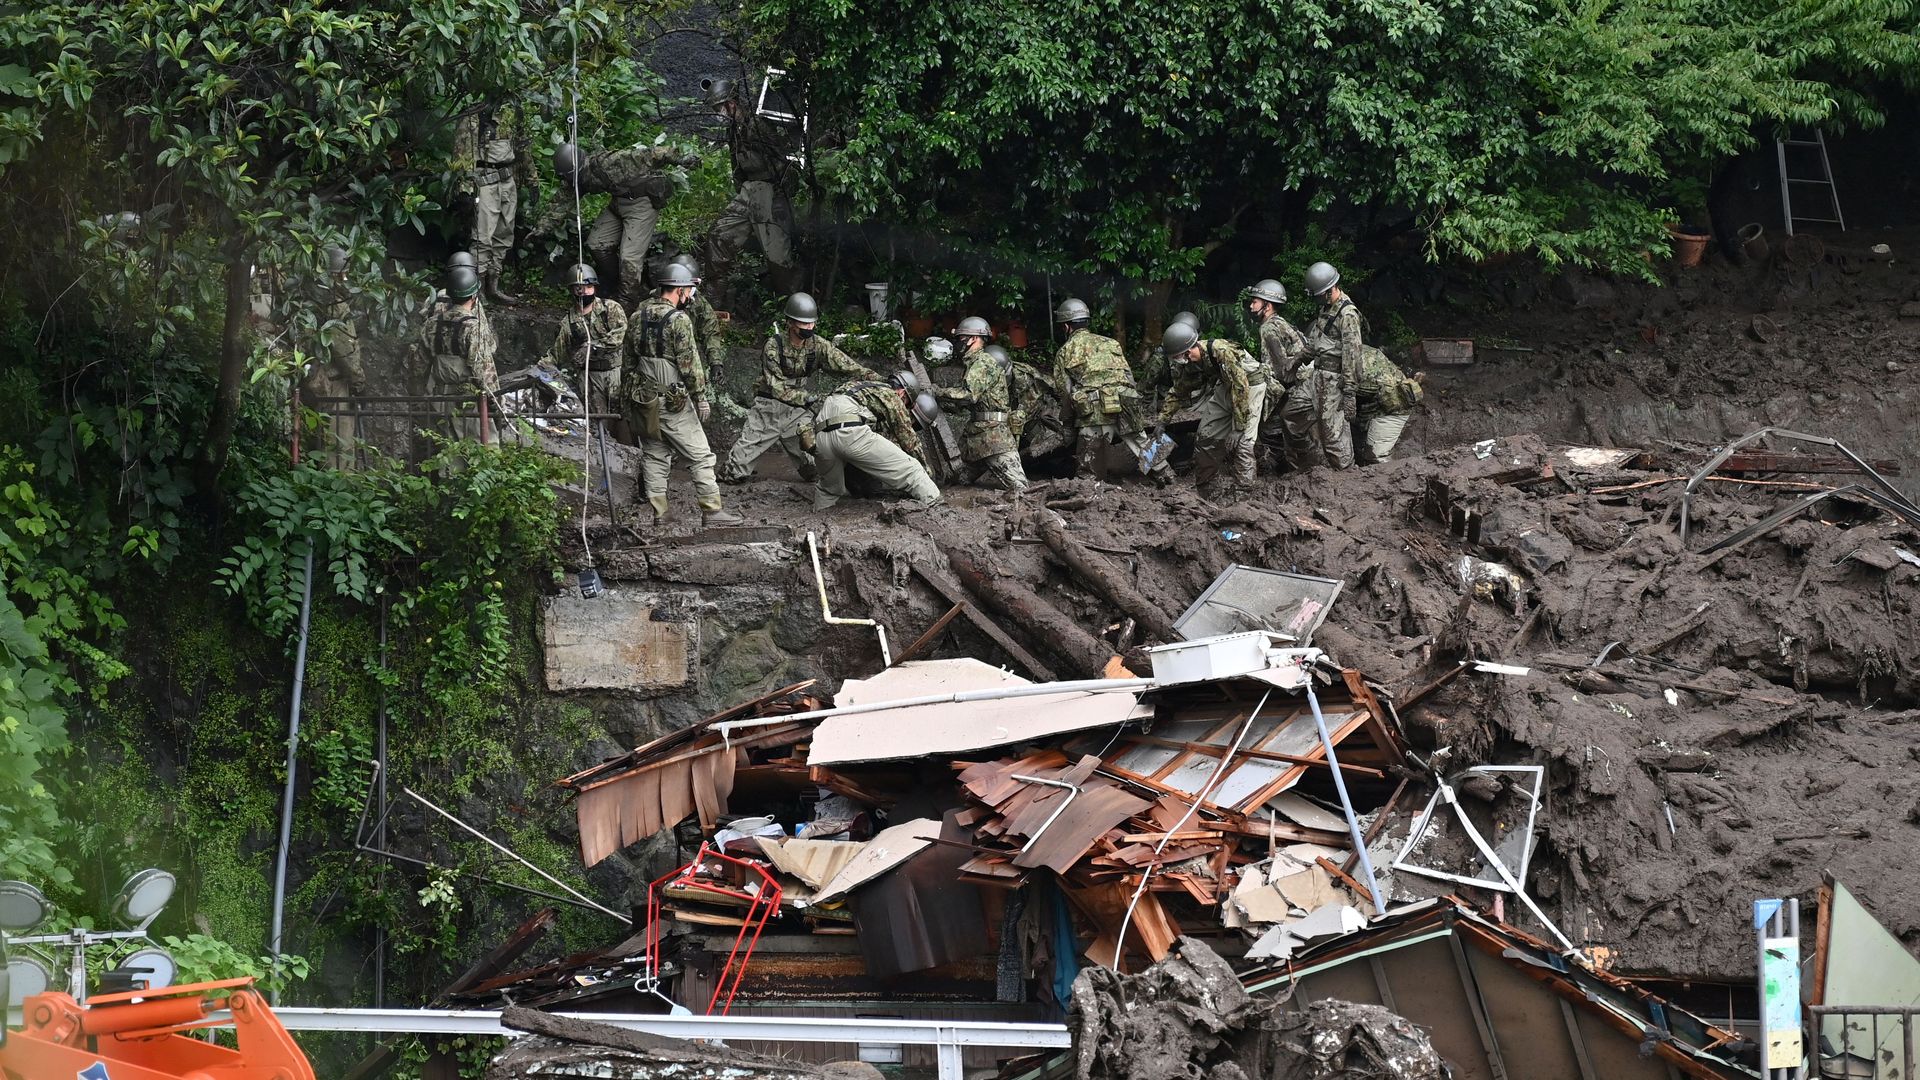 Members of Japan's Self-Defense Forces sift through mud and debris as they search for missing people at the scene of a landslide in Atami, Shizuoka Prefecture, on July 5